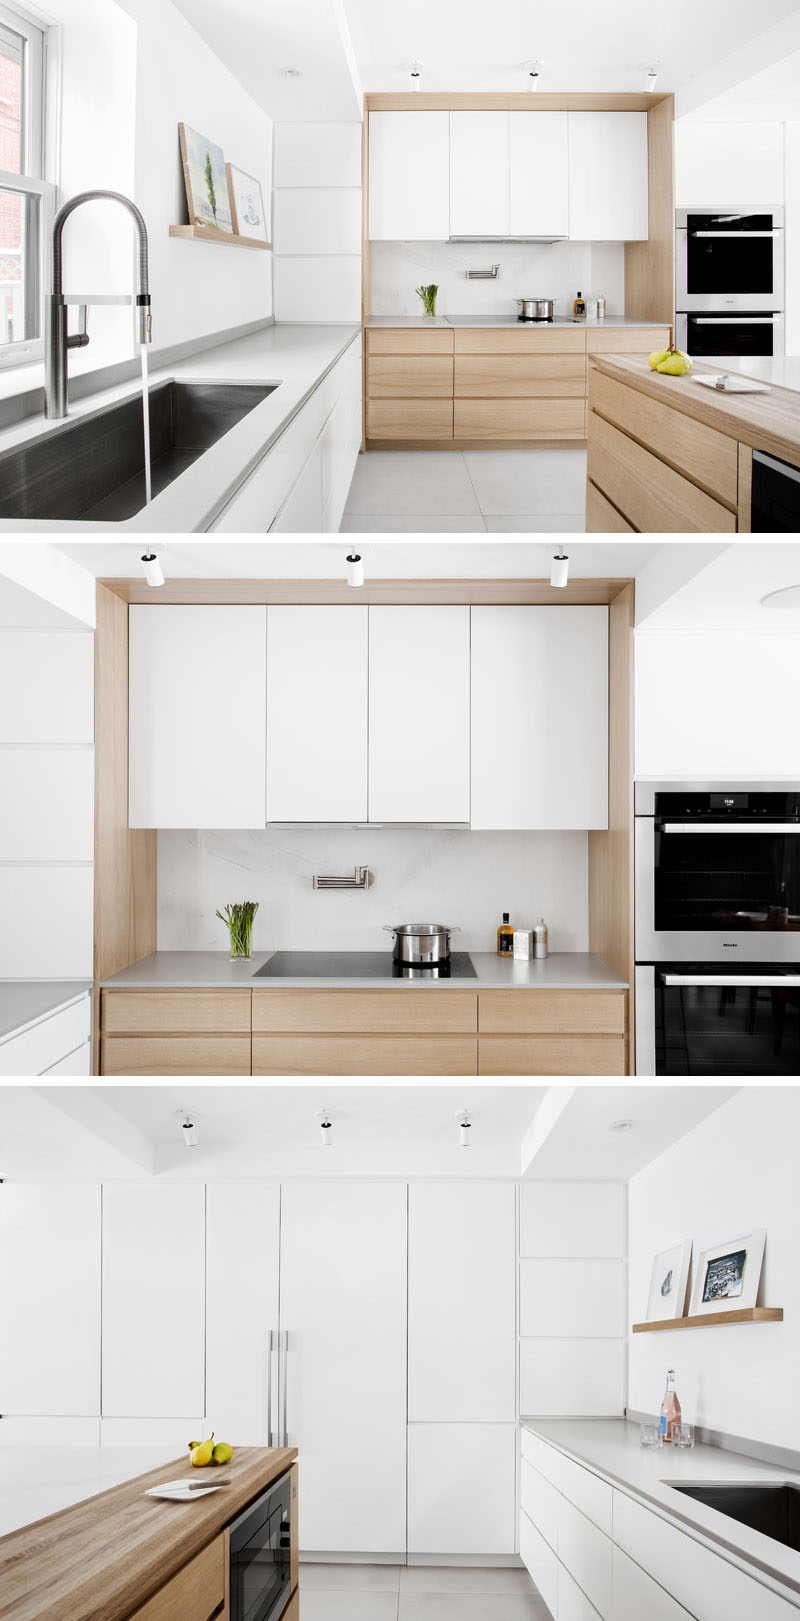 In this updated kitchen, white lacquered doors for the kitchen cabinets and integrated fridge panels extend to the ceiling and cast a bright reflection into the room. Additional lighting was added and to tie in with the dining table, the island and some of the lower cabinets are made of butternut and oiled in a matte finish. Large, oversized heated tiles used for the flooring resemble soft concrete.